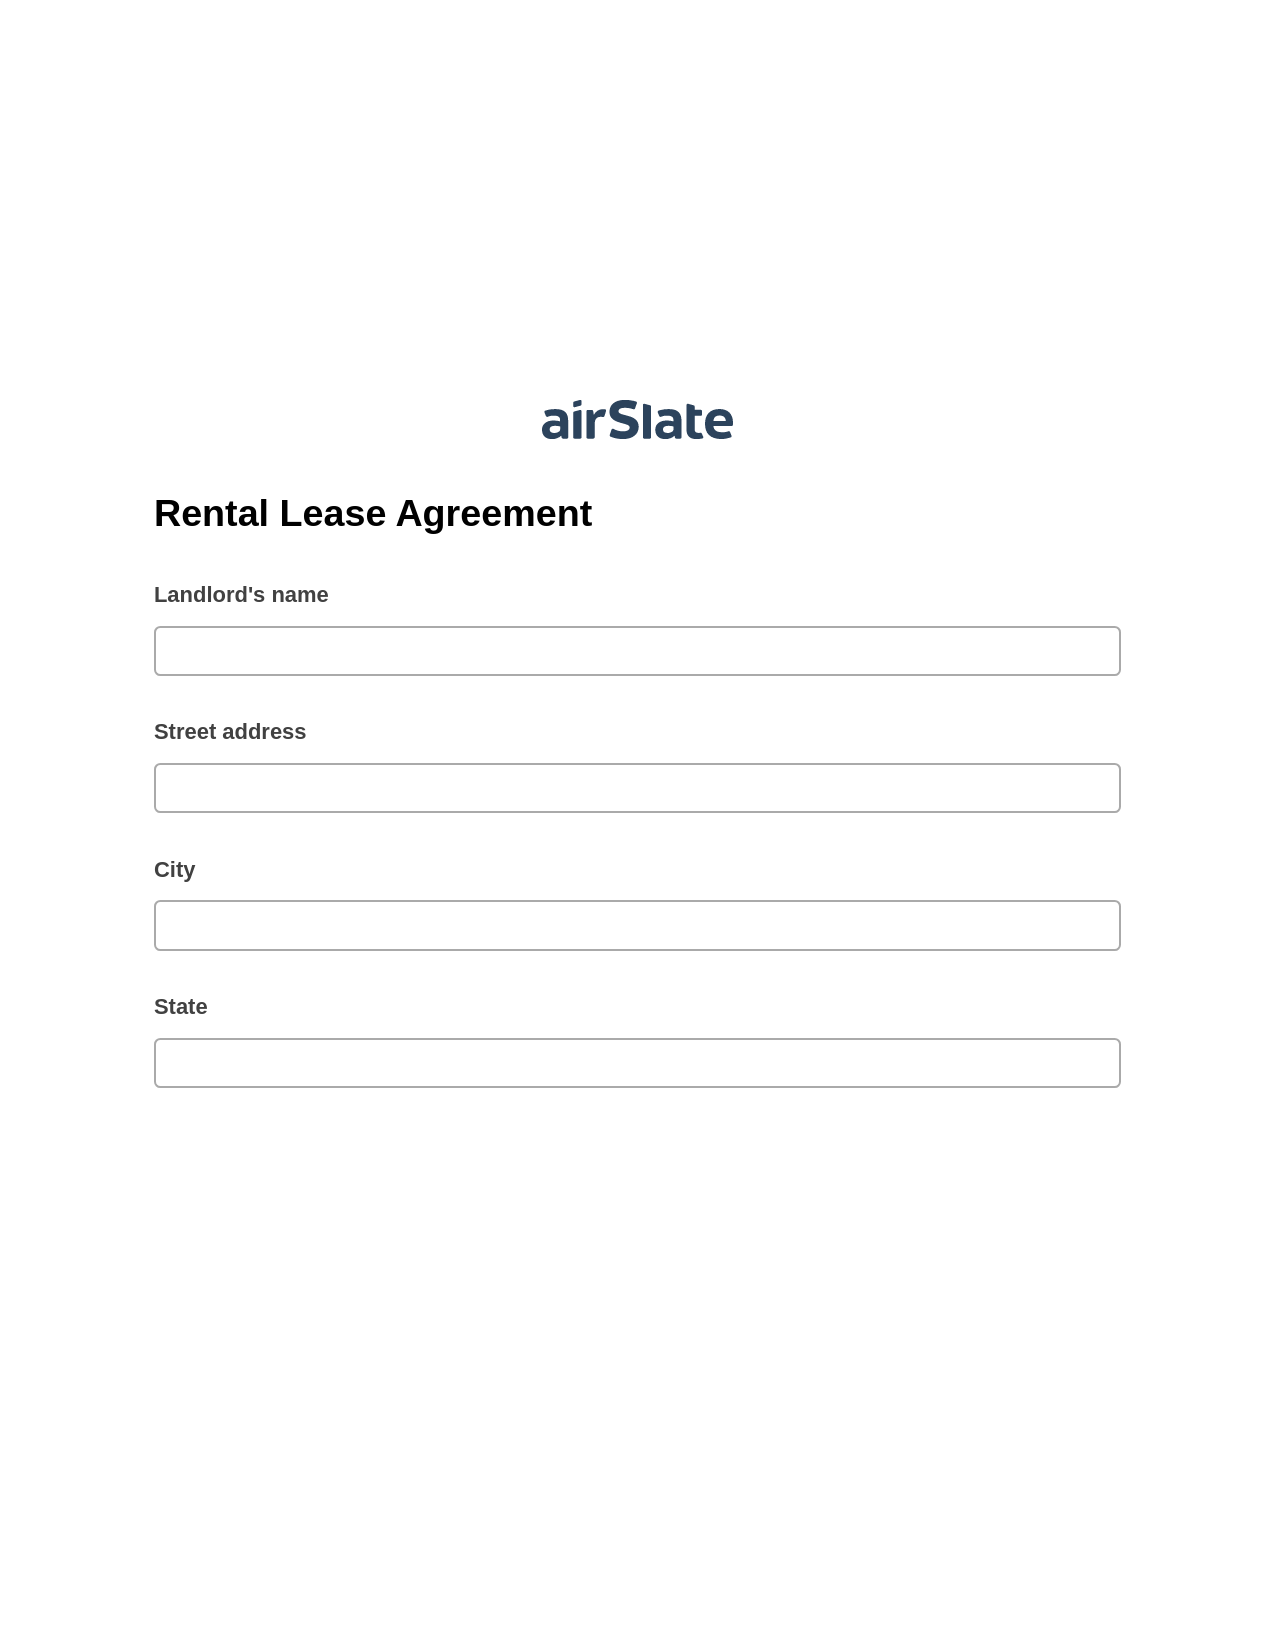 Rental Lease Agreement Pre-fill from Excel Spreadsheet Dropdown Options Bot, Google Cloud Print Bot, Export to Formstack Documents Bot